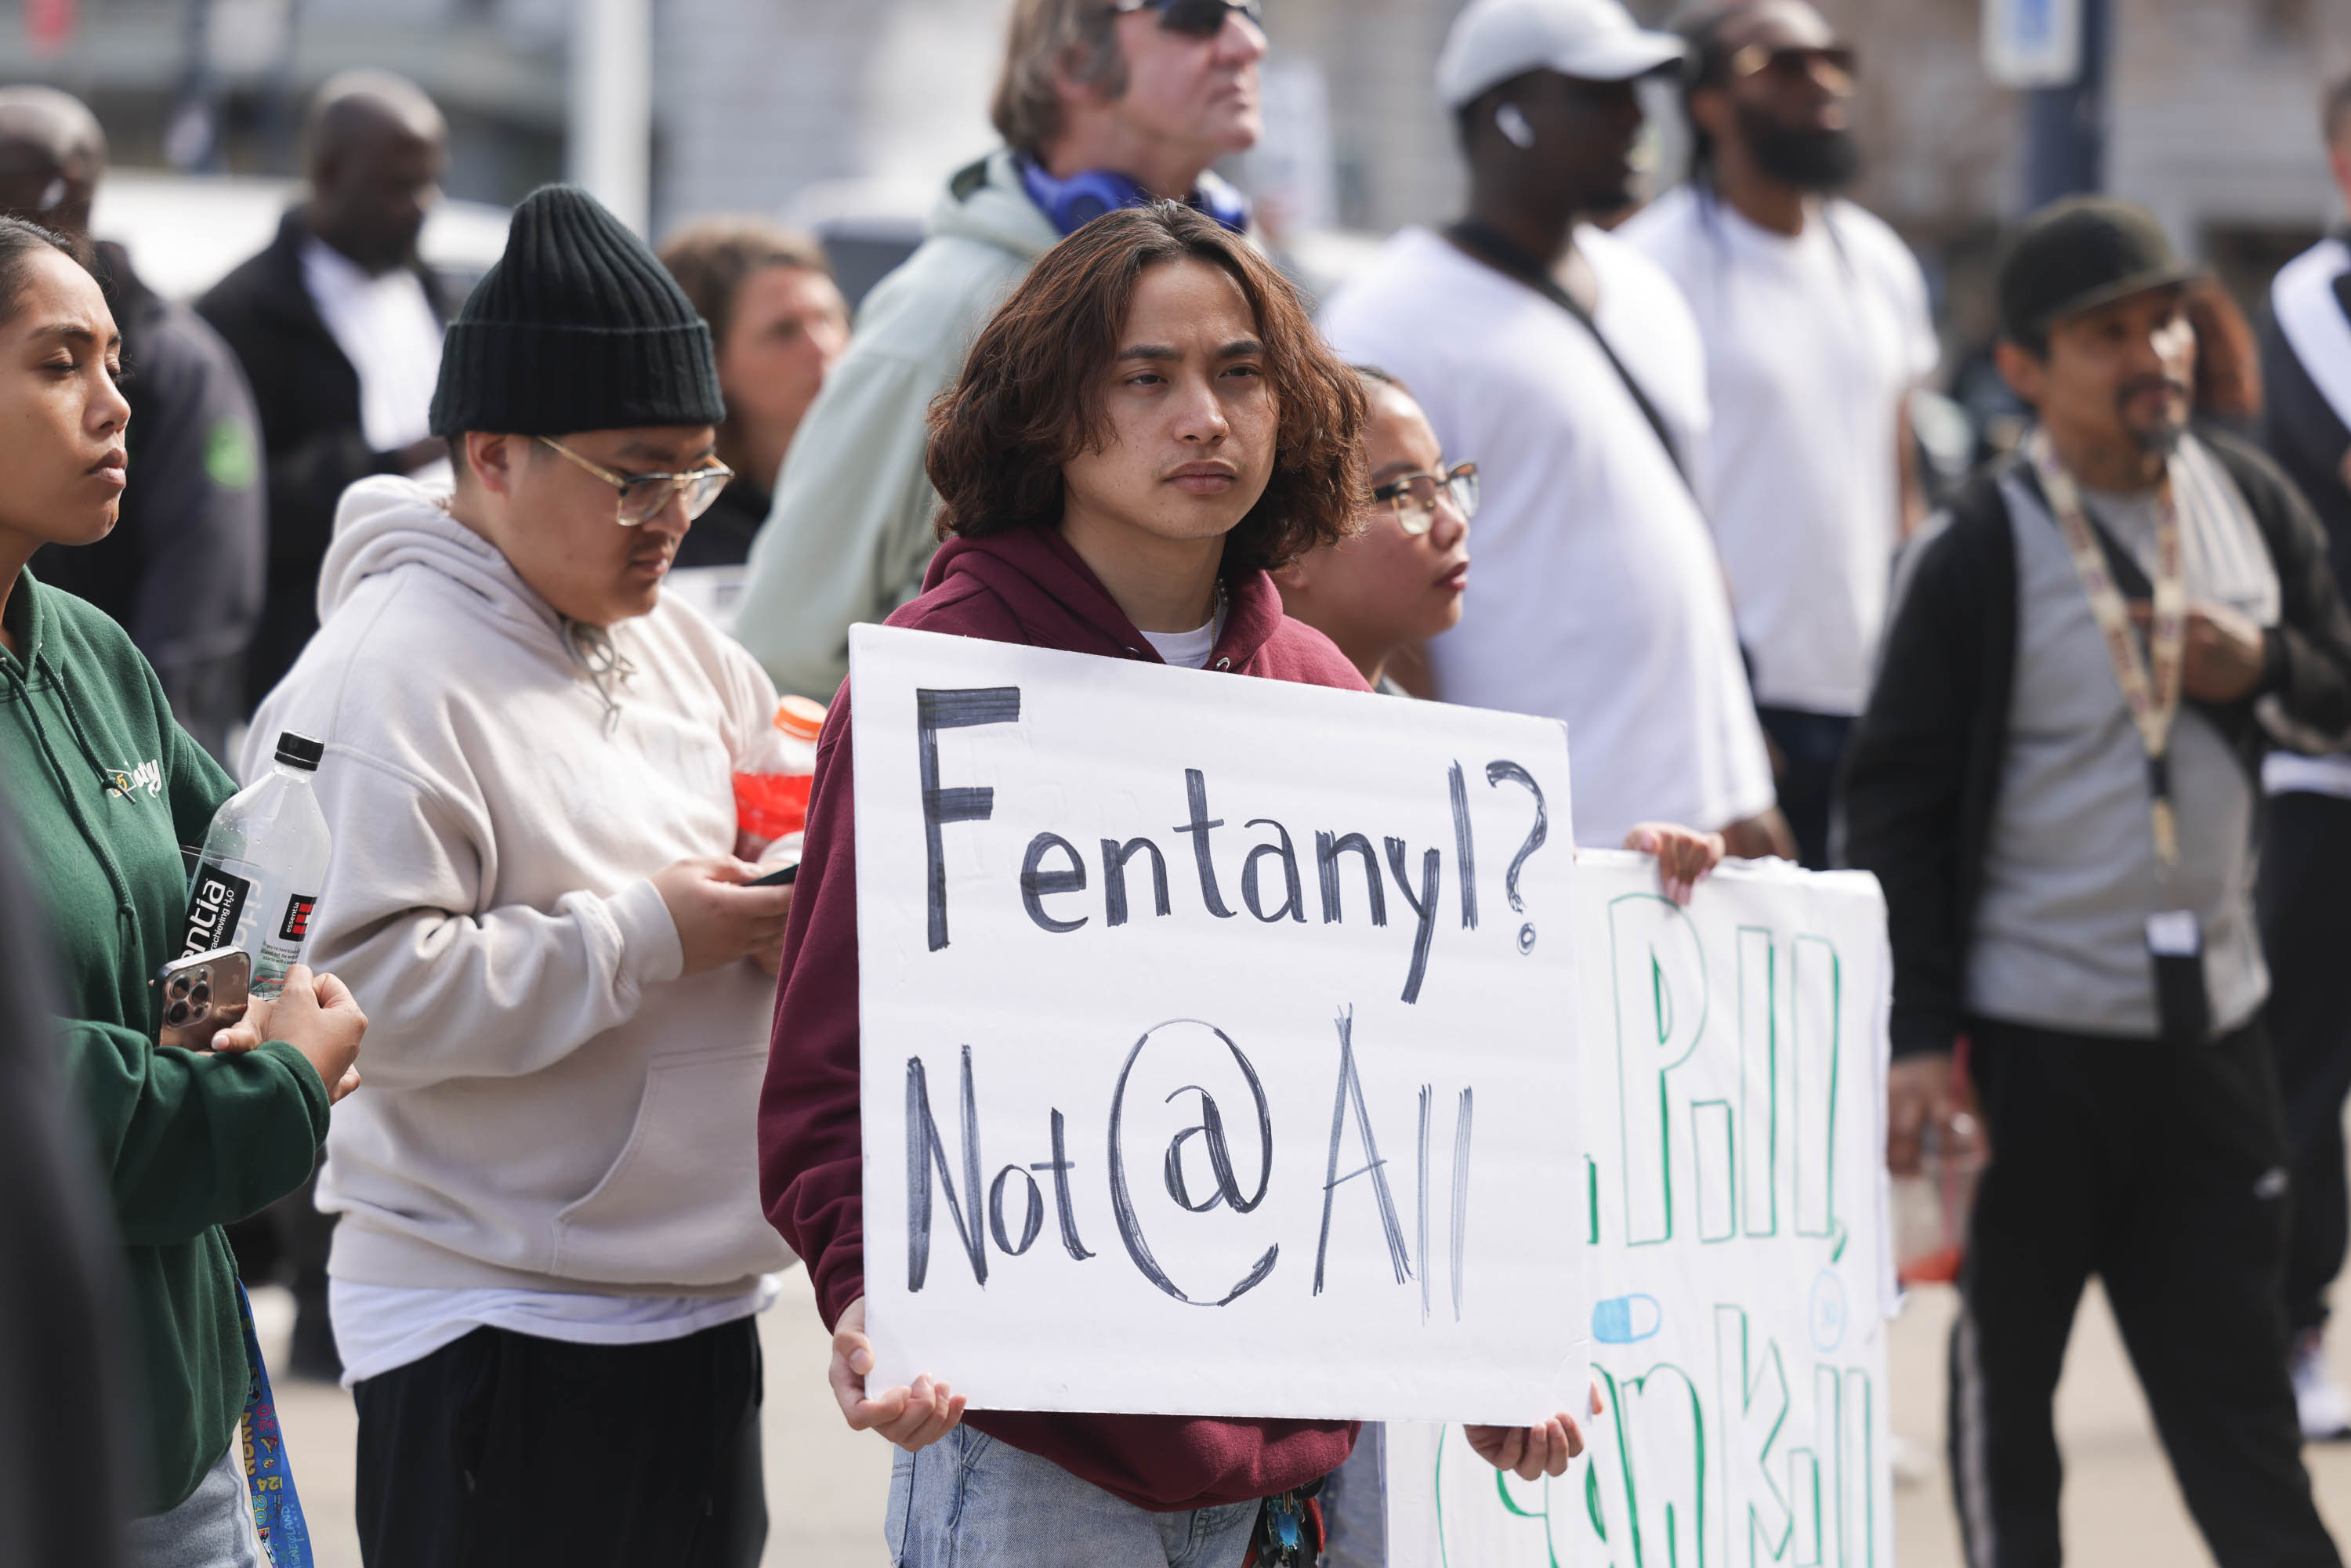 A person is holding a sign reading &quot;Fentanyl? Not @ All&quot; in a crowd.